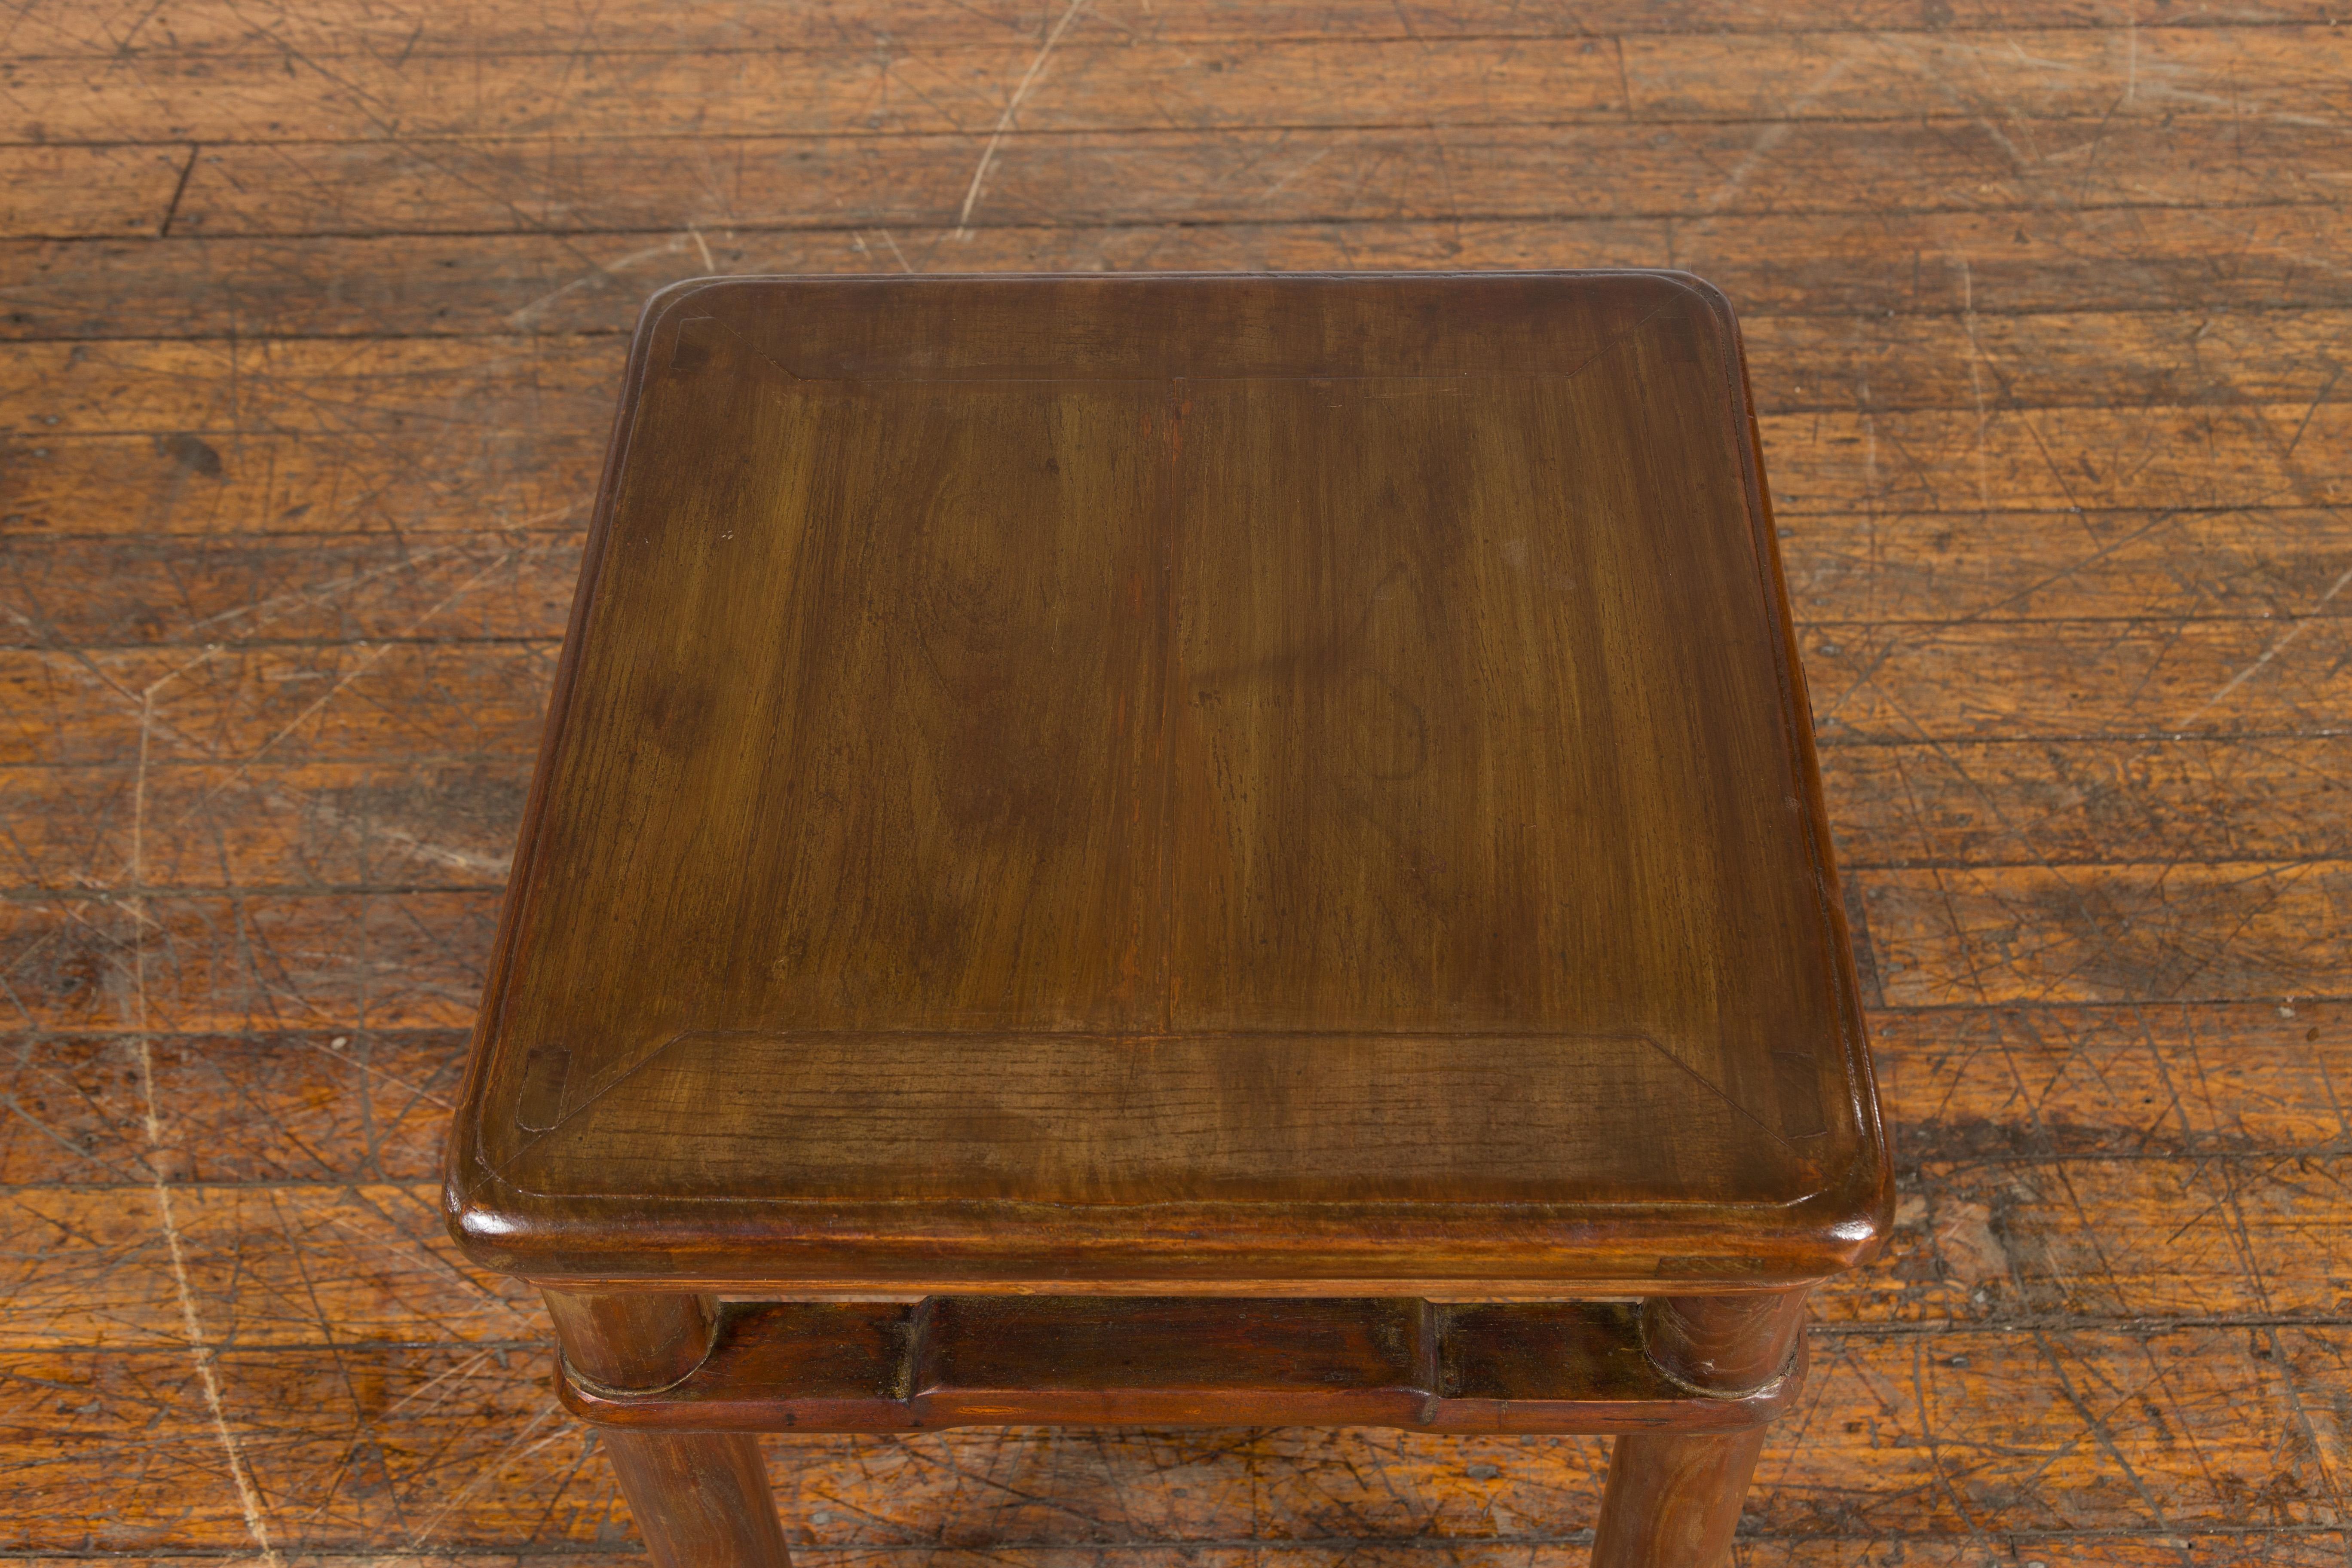 Wood Chinese Qing Dynasty Period 19th Century Side Table with Humpback Stretchers For Sale